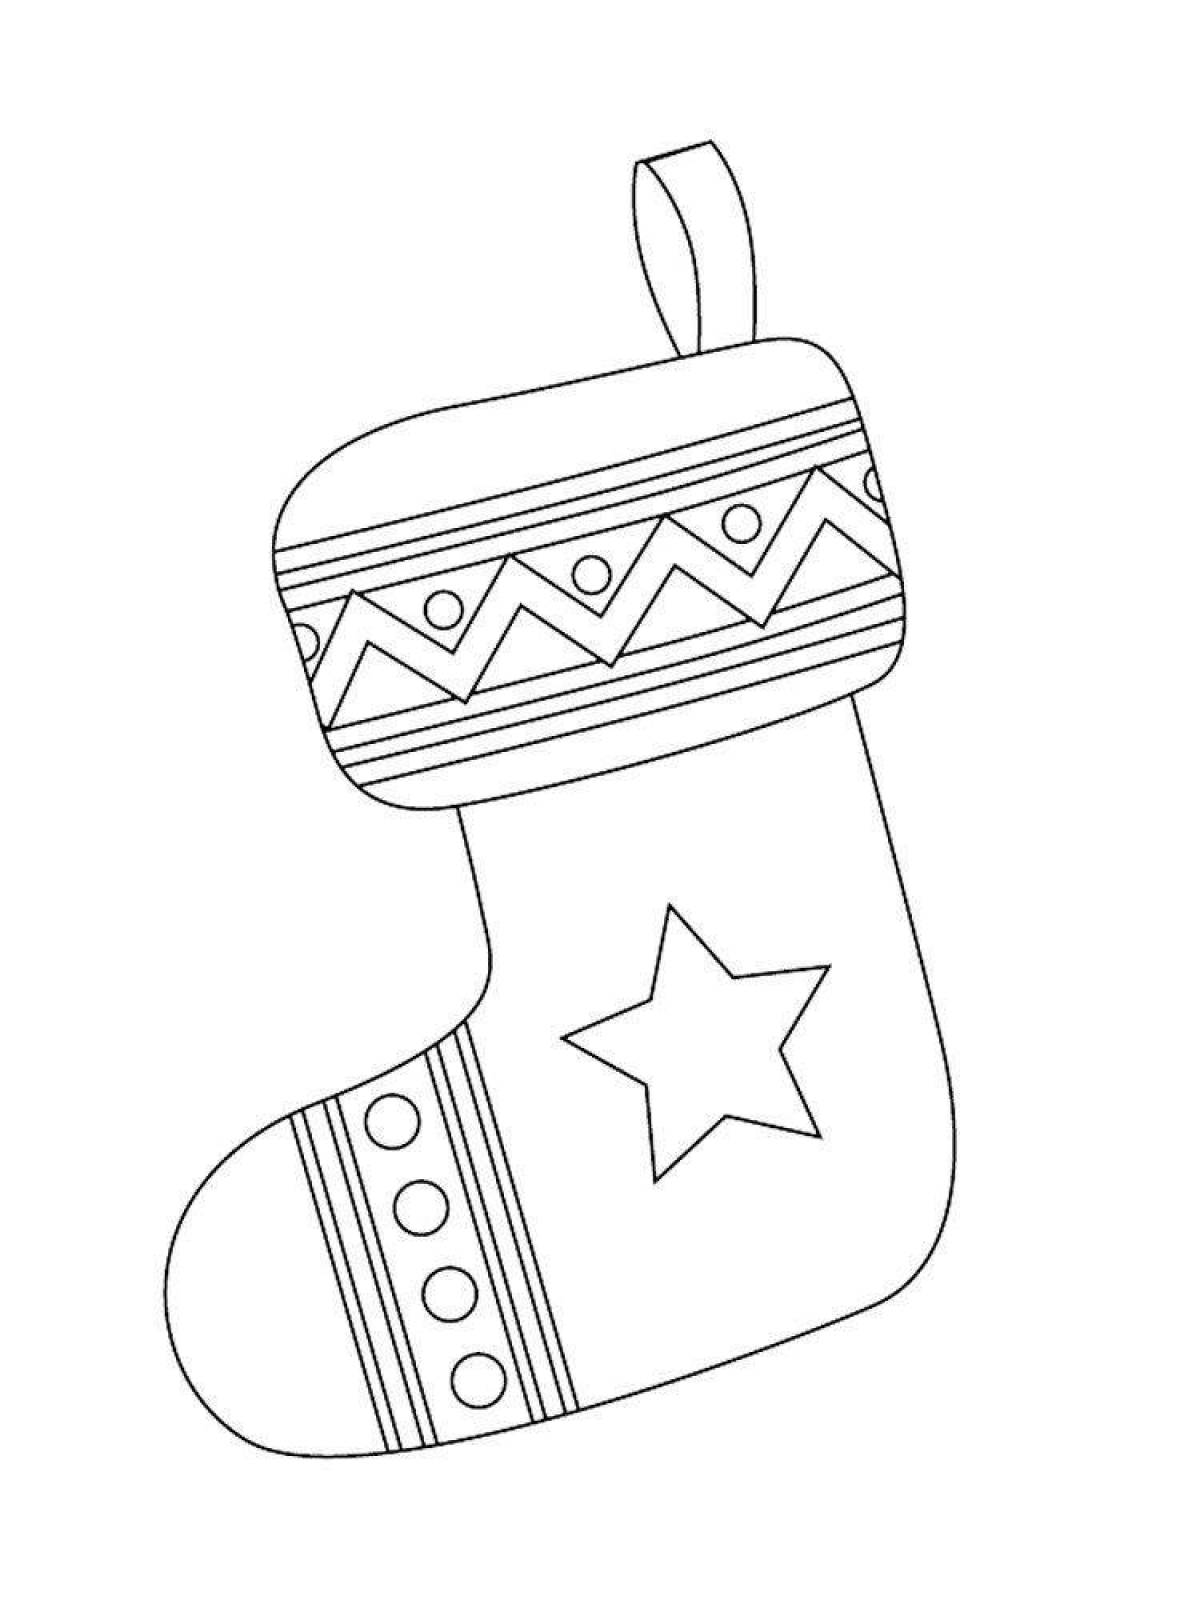 Fine boots coloring page